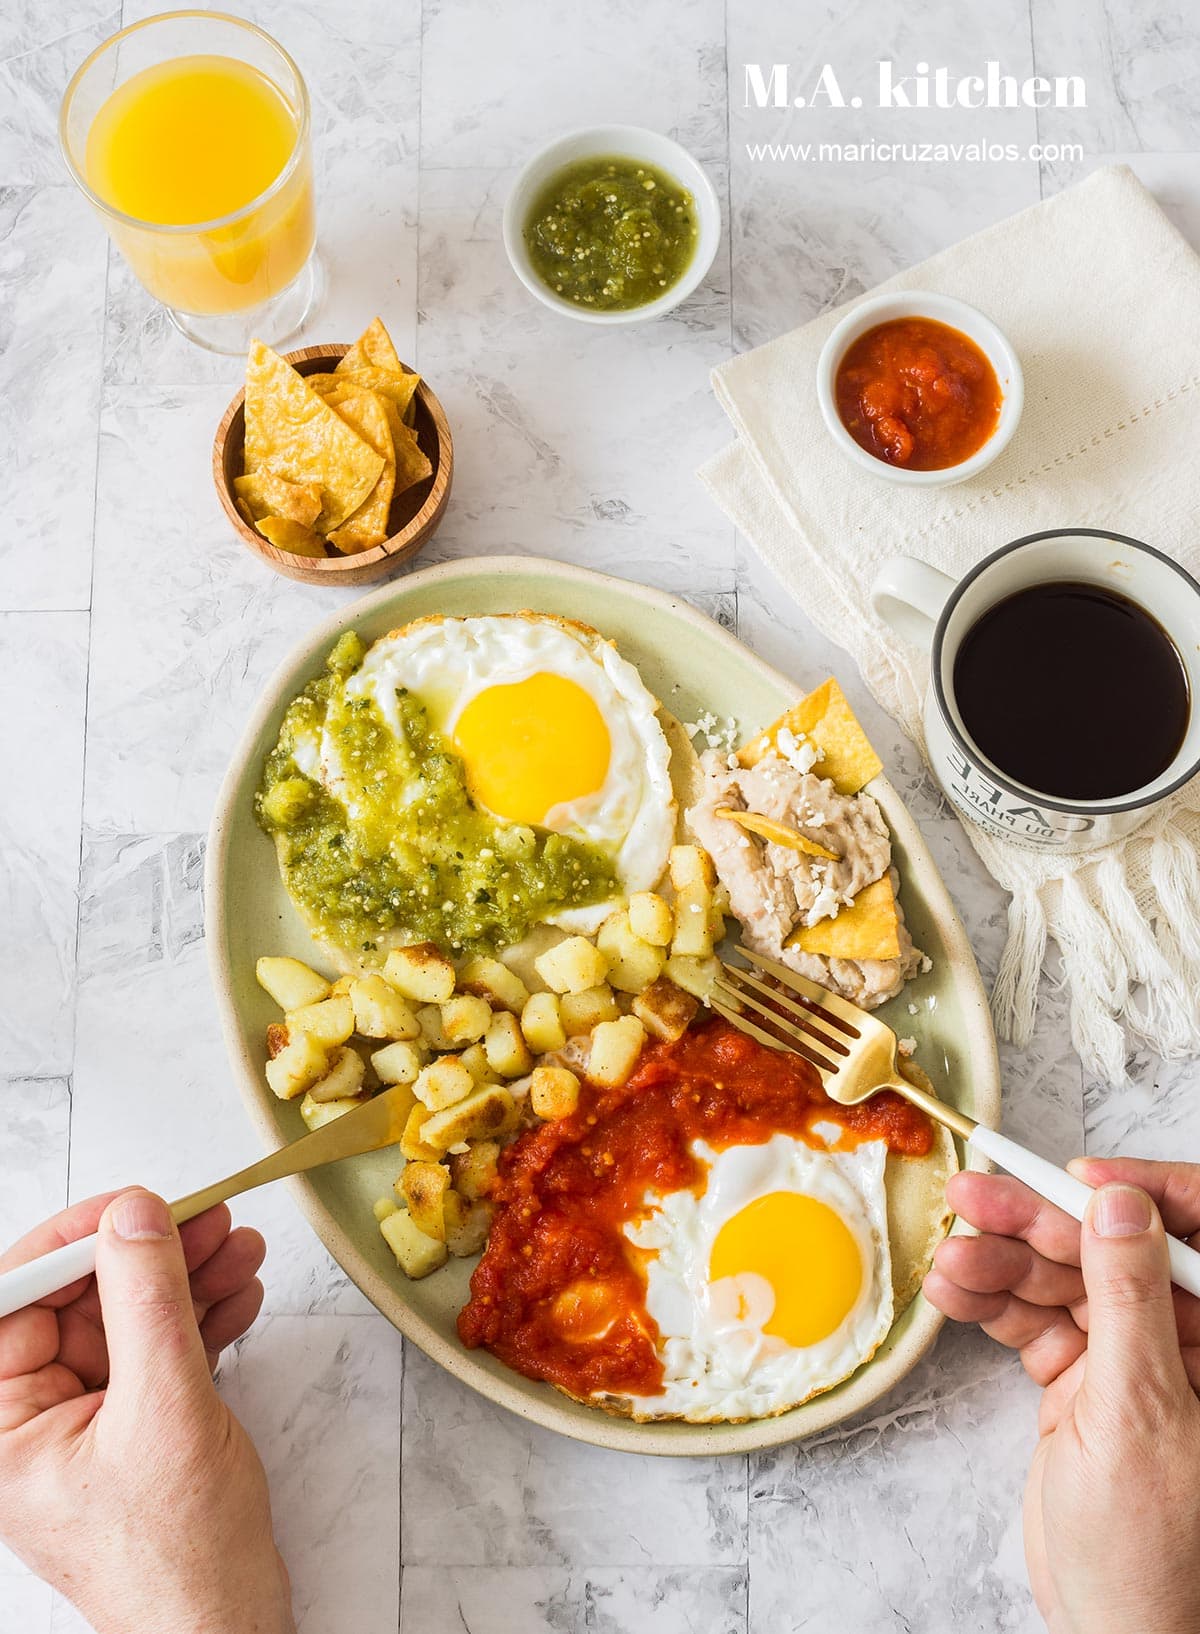 Man hands with utensils over huevos divorciados served with refried beans and potatoes. Around two bowls with salsas and corn chips, coffee, and orange juice on a glass.